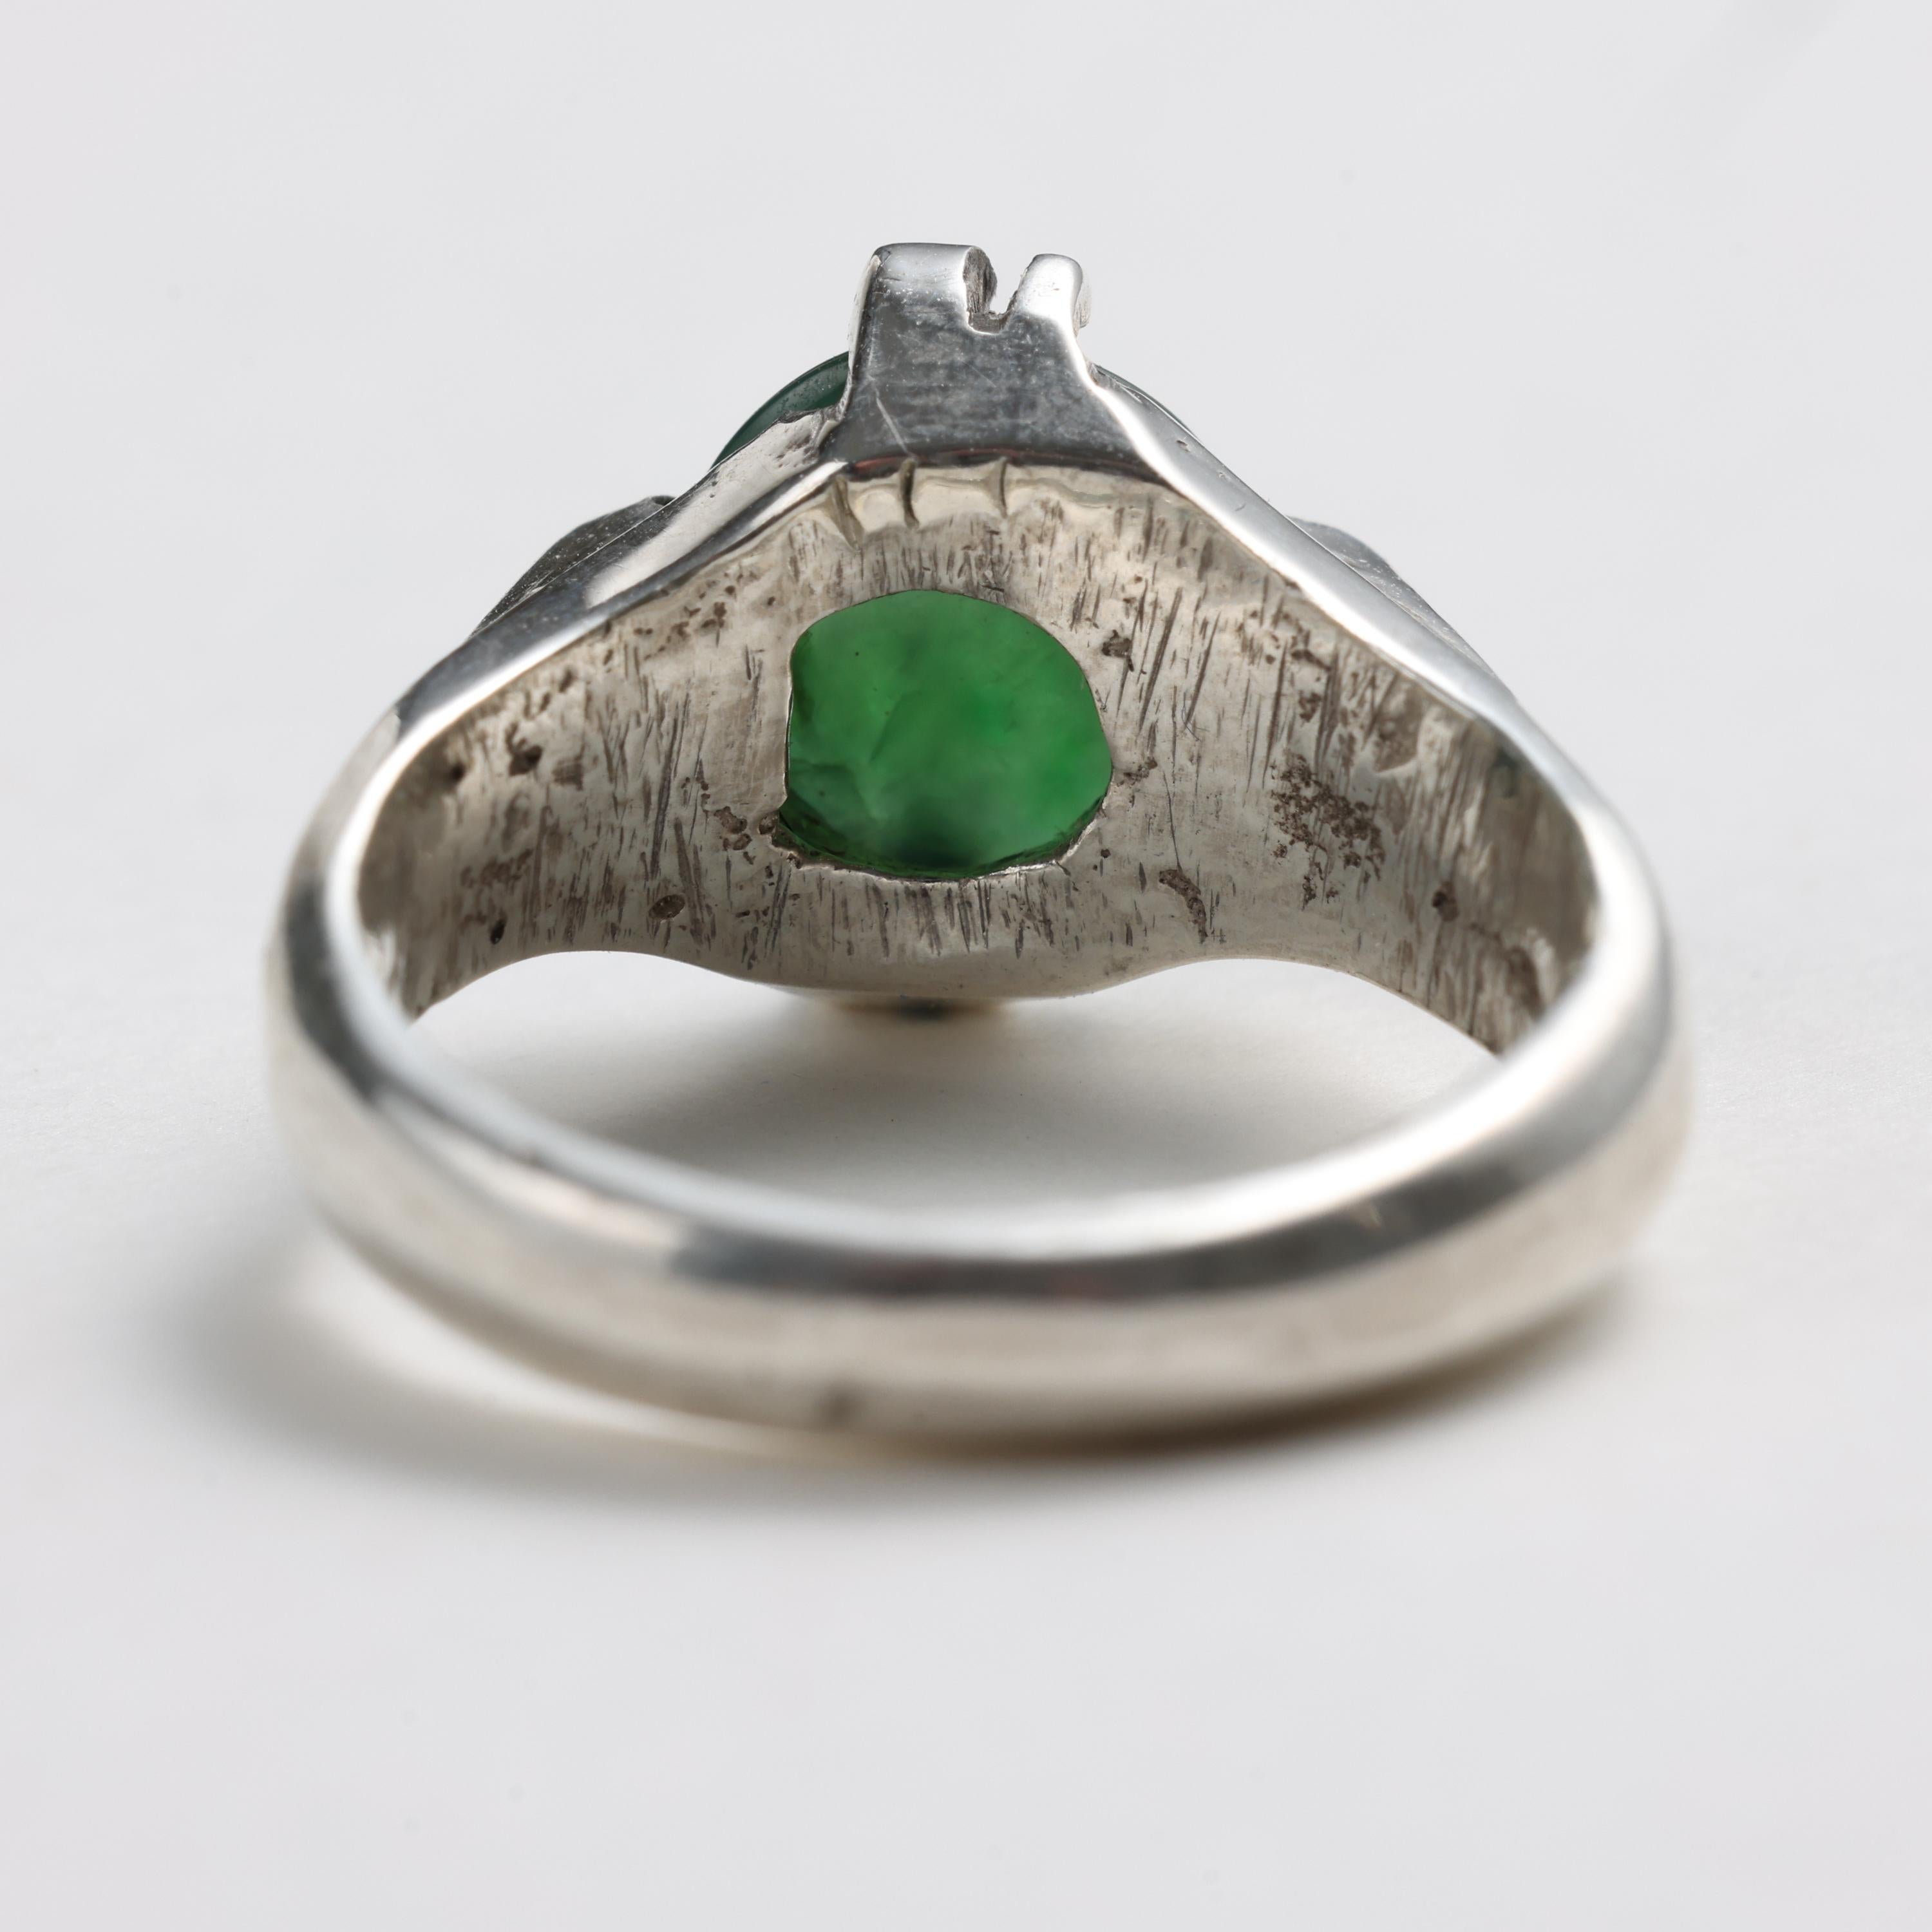 Women's or Men's Omphacite Jade Ring in Silver, Certified Untreated Fei Cui